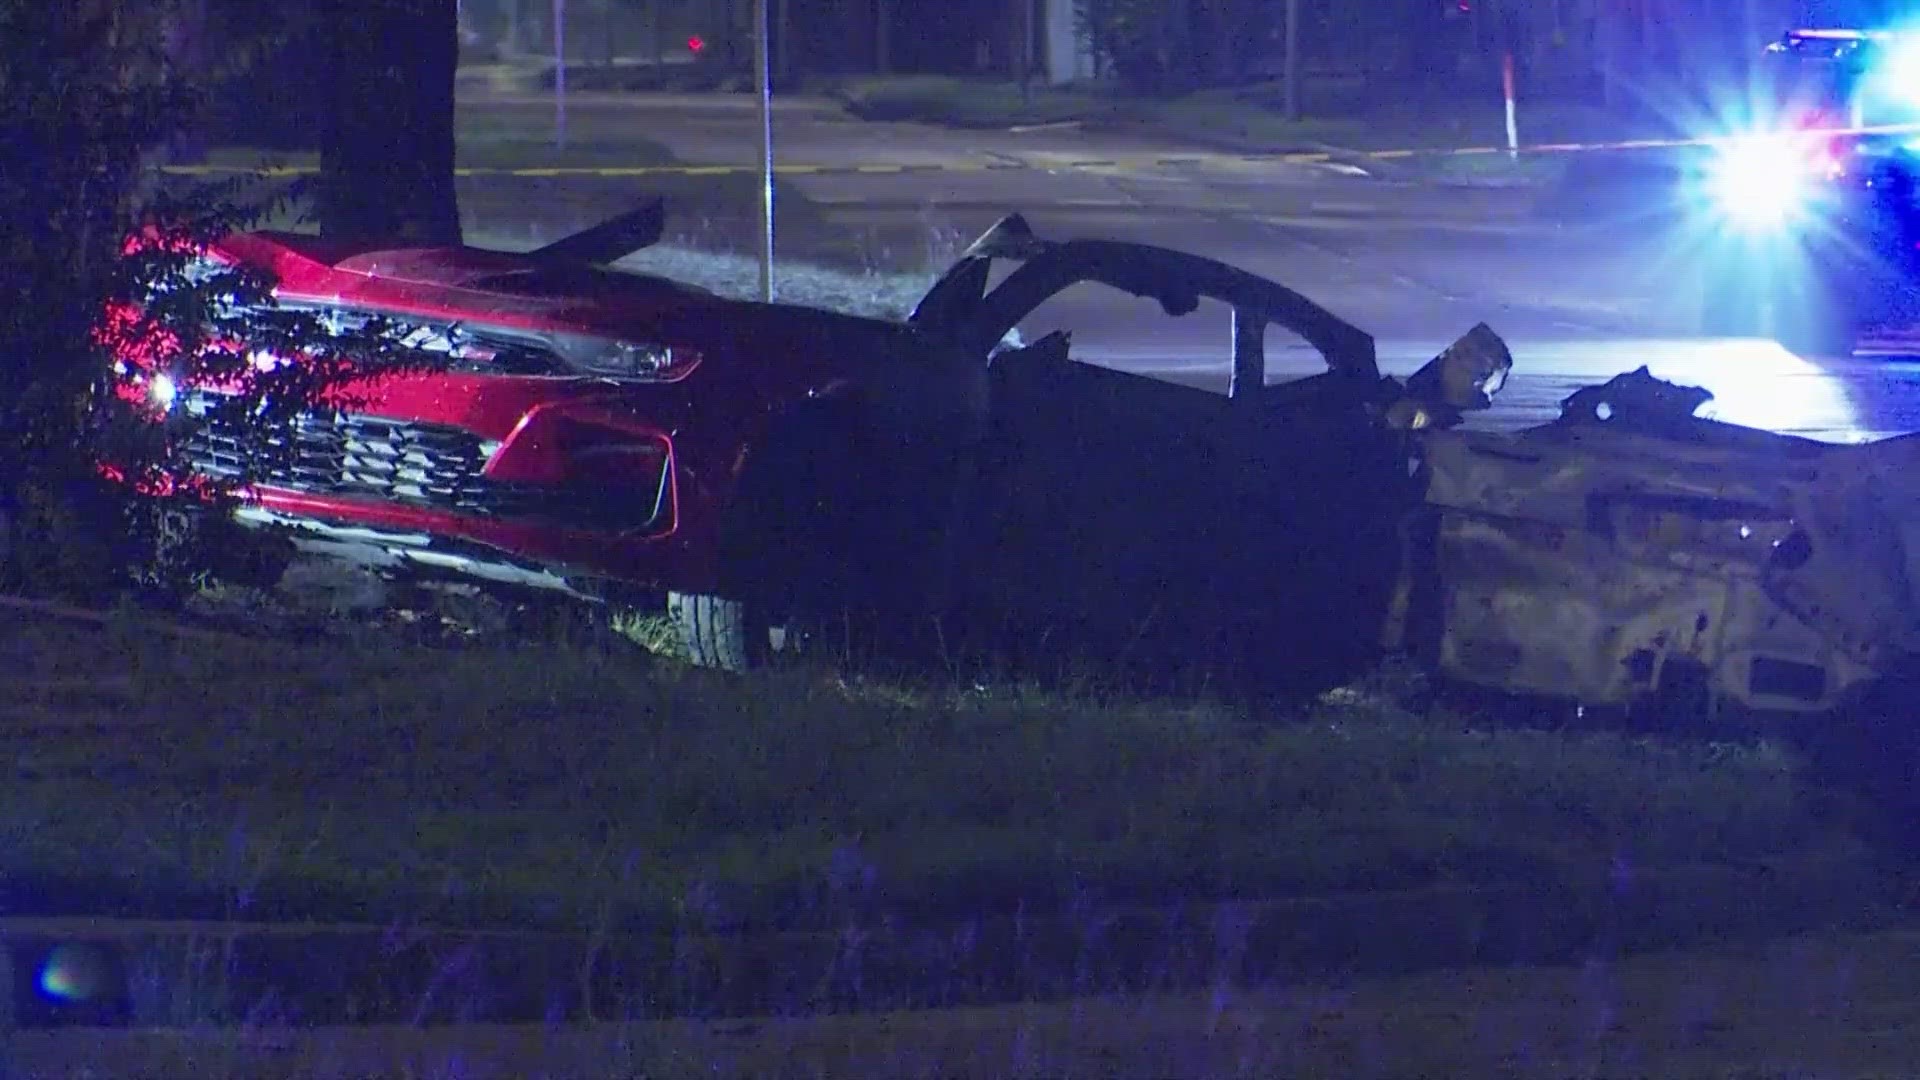 Houston police said the car was driving extremely fast when it hit a tree and immediately caught fire.